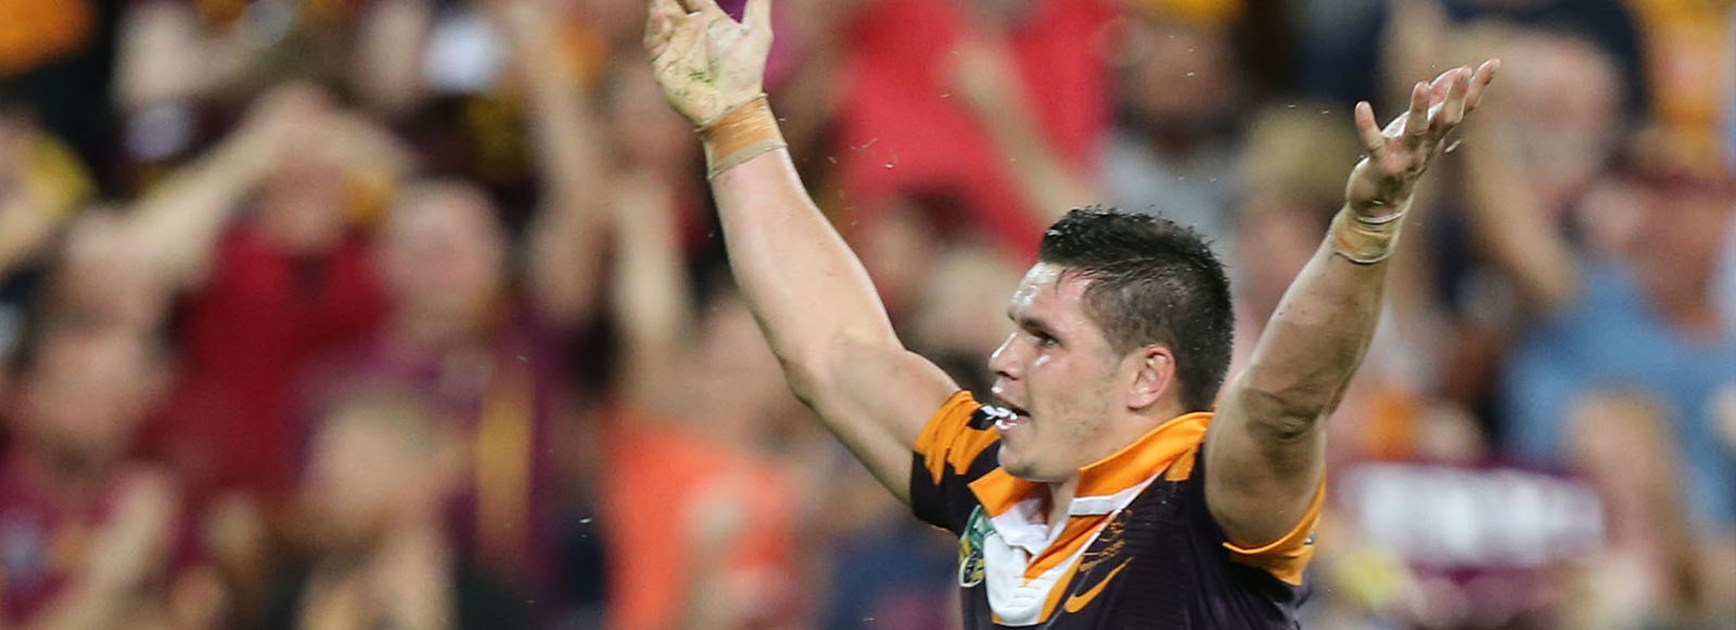 James "the jet" Roberts took off in the Grand Final rematch, his best peformance in a Broncos jersey.